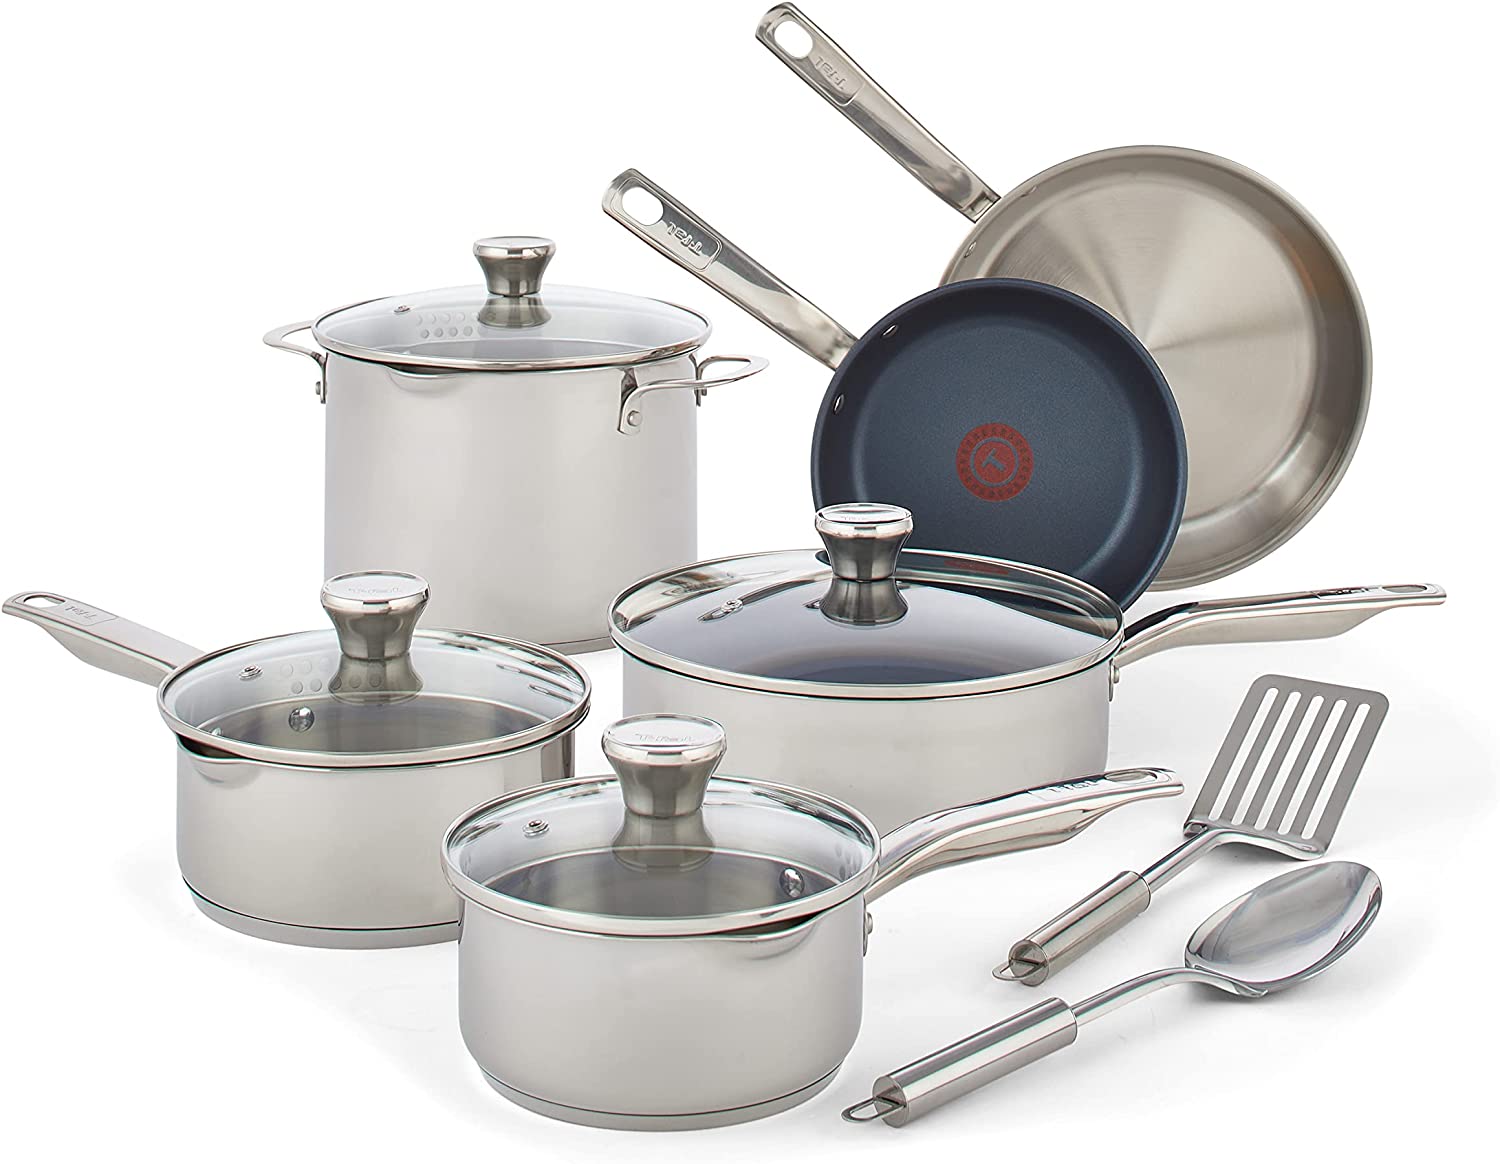 https://discounttoday.net/wp-content/uploads/2023/01/T-fal-Unlimited-Collection-Stainless-Steel-Platinum-Non-stick-12-Piece-Cookware-Set.jpg